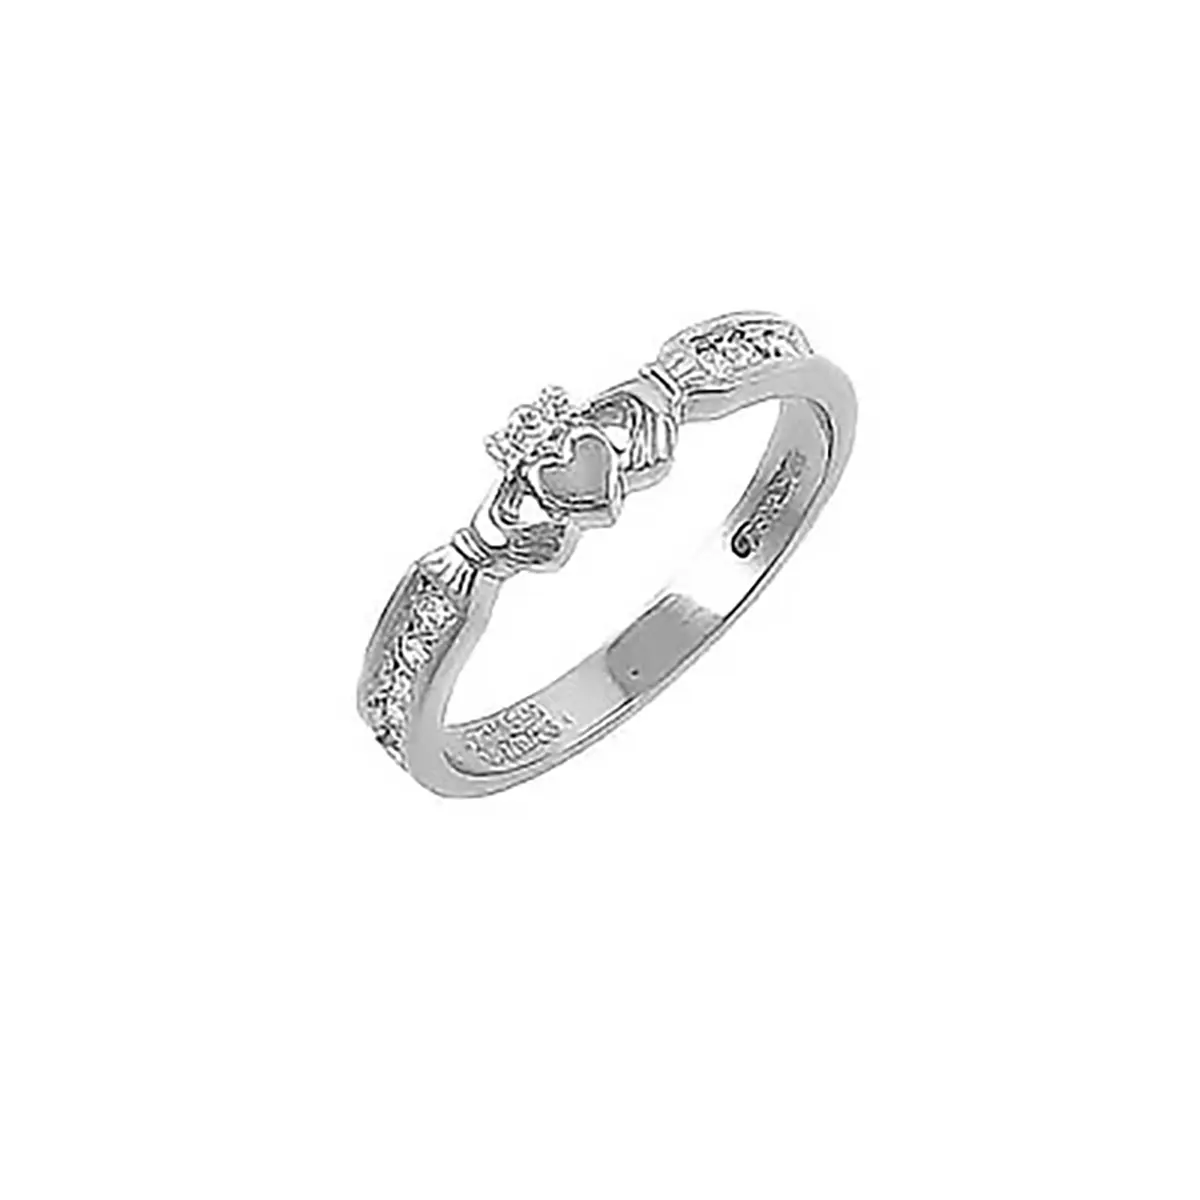 Claddagh Ring In White Gold With Brilliant Cut Diamond...